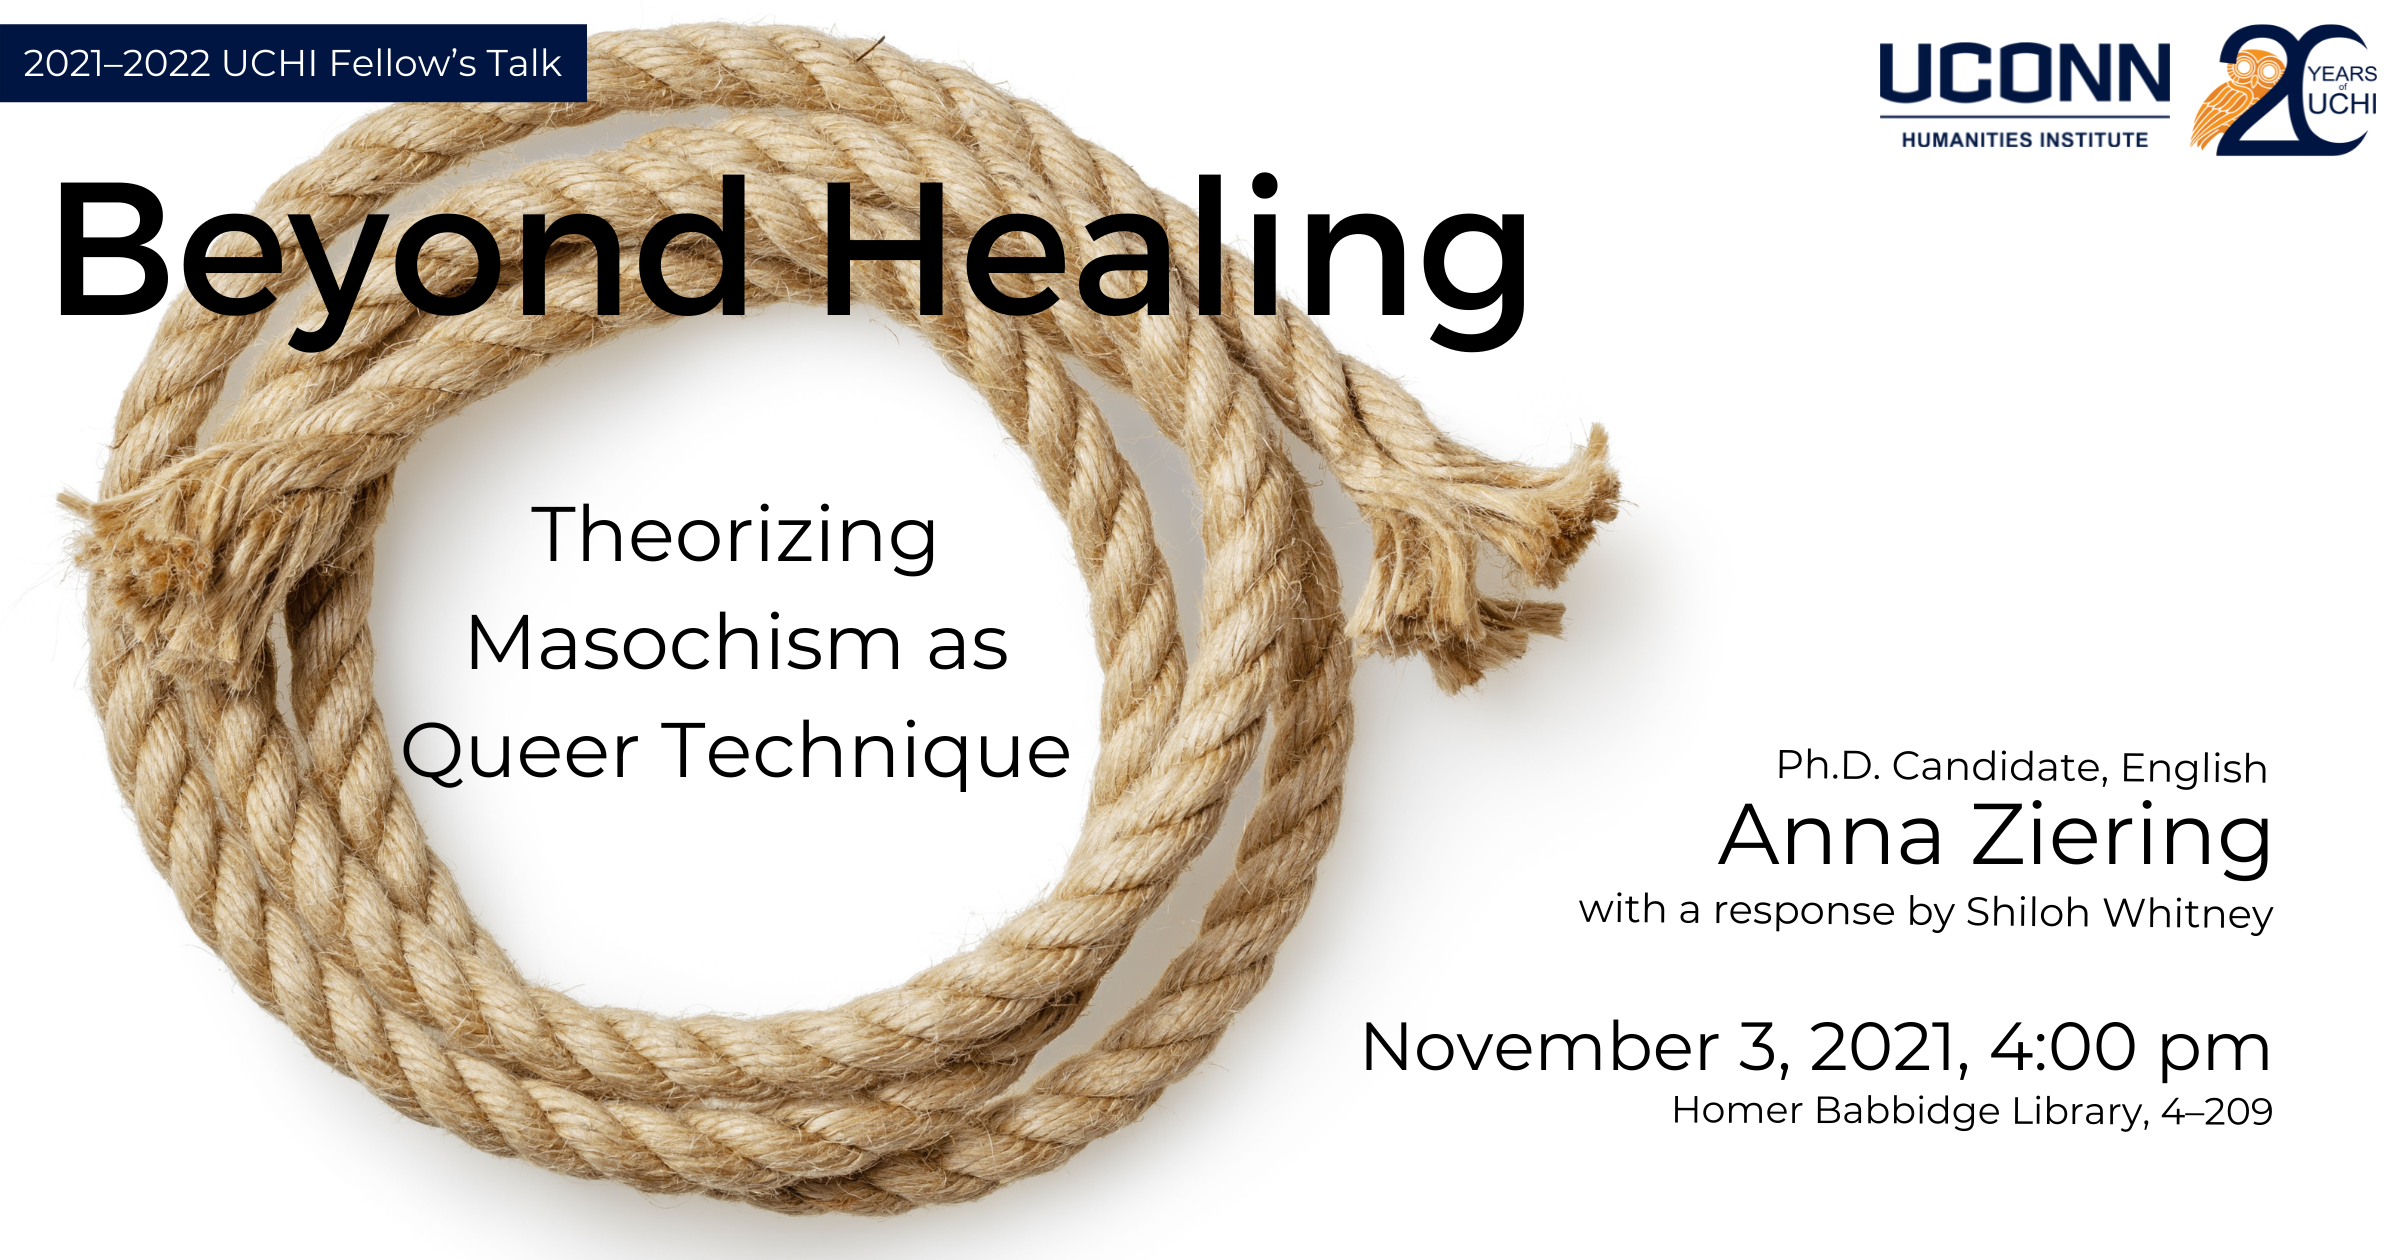 Beyond Healing: Theorizing Masochism as Queer Technique. Ph.D. Candidate English, Anna Ziering, with a response by Shiloh Whitney. November 3, 3031, 4:00pm. HBL 4-209.